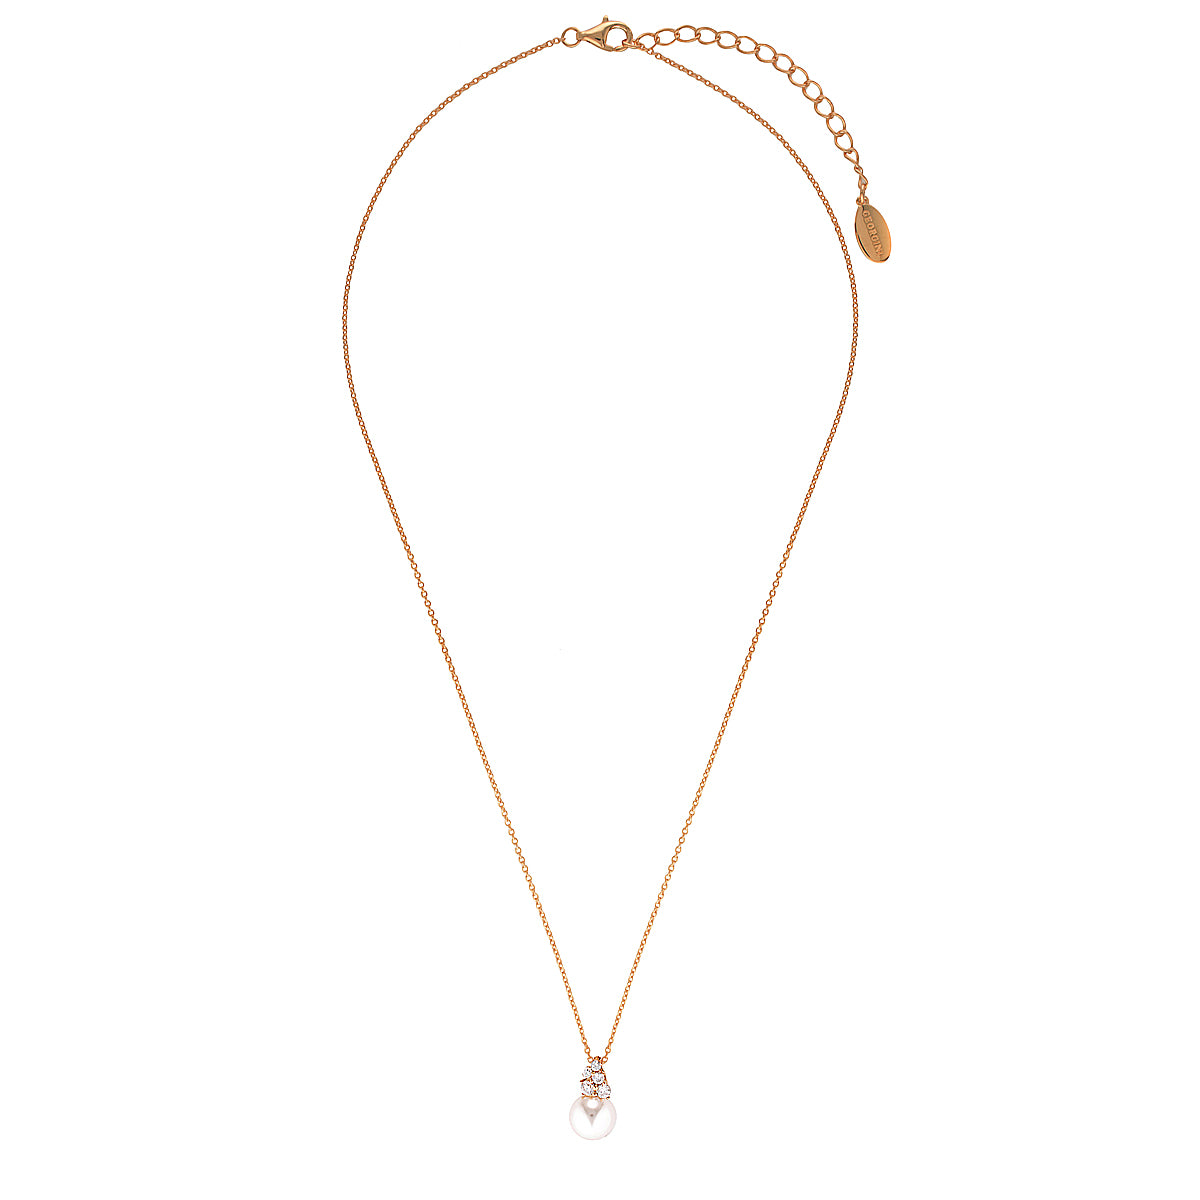 RED CARPET GOVENORS NECKLACE ROSE GOLD